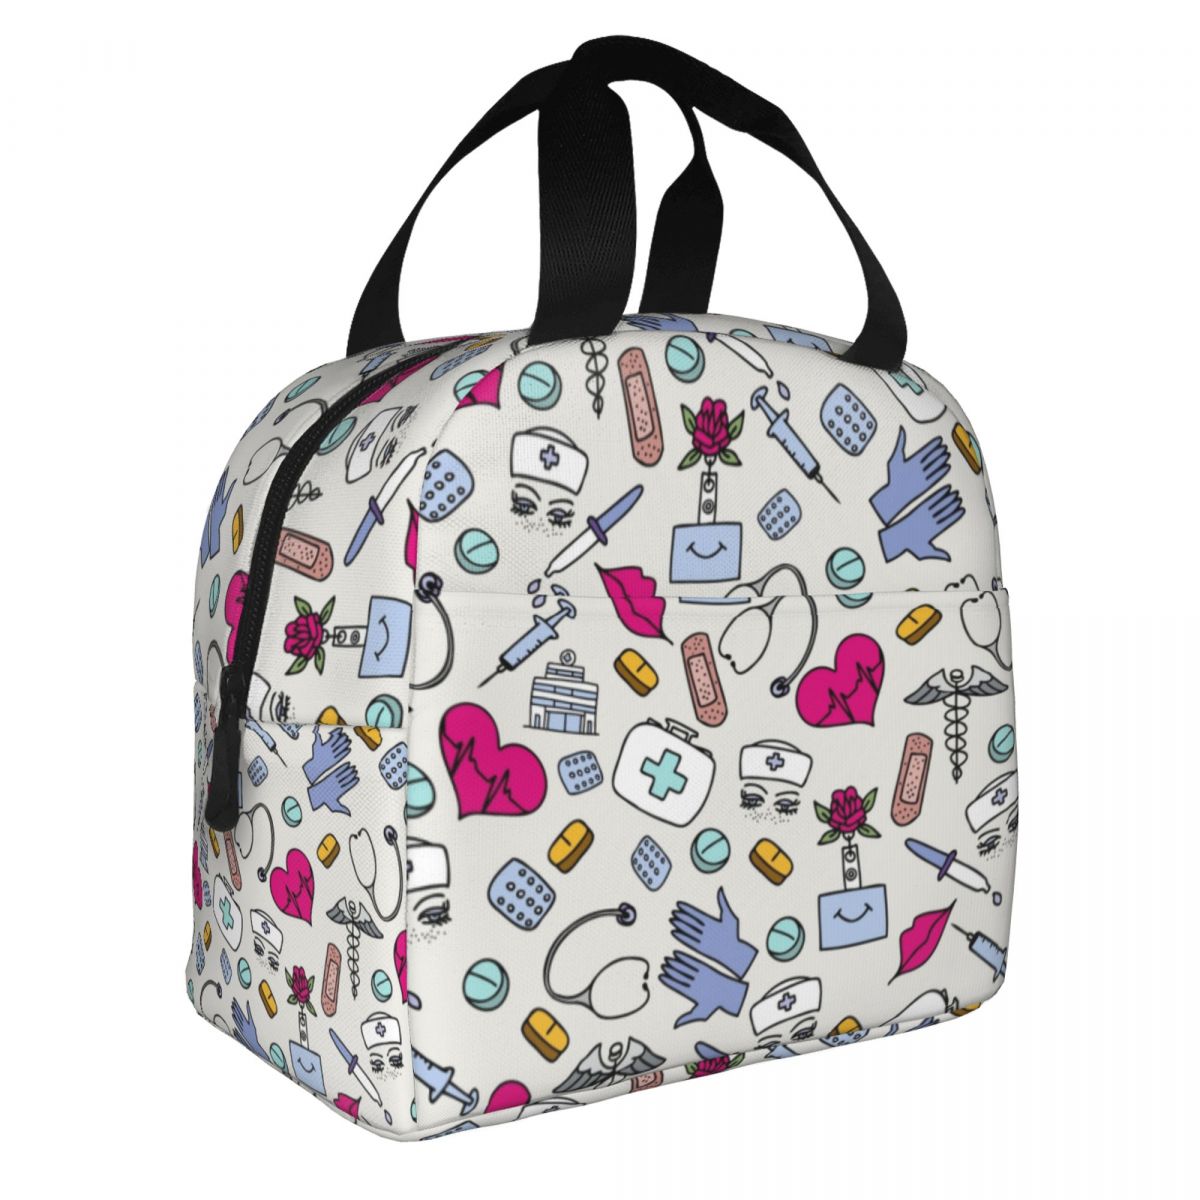 Nurse Print Insulated Portable Lunch Tote Bag  Large Capacity Nurse Picnic Bag Insulated Lunch Bag Women Nurse Print Food Case Portable School Bento Fruits Fresh Storage Pouch